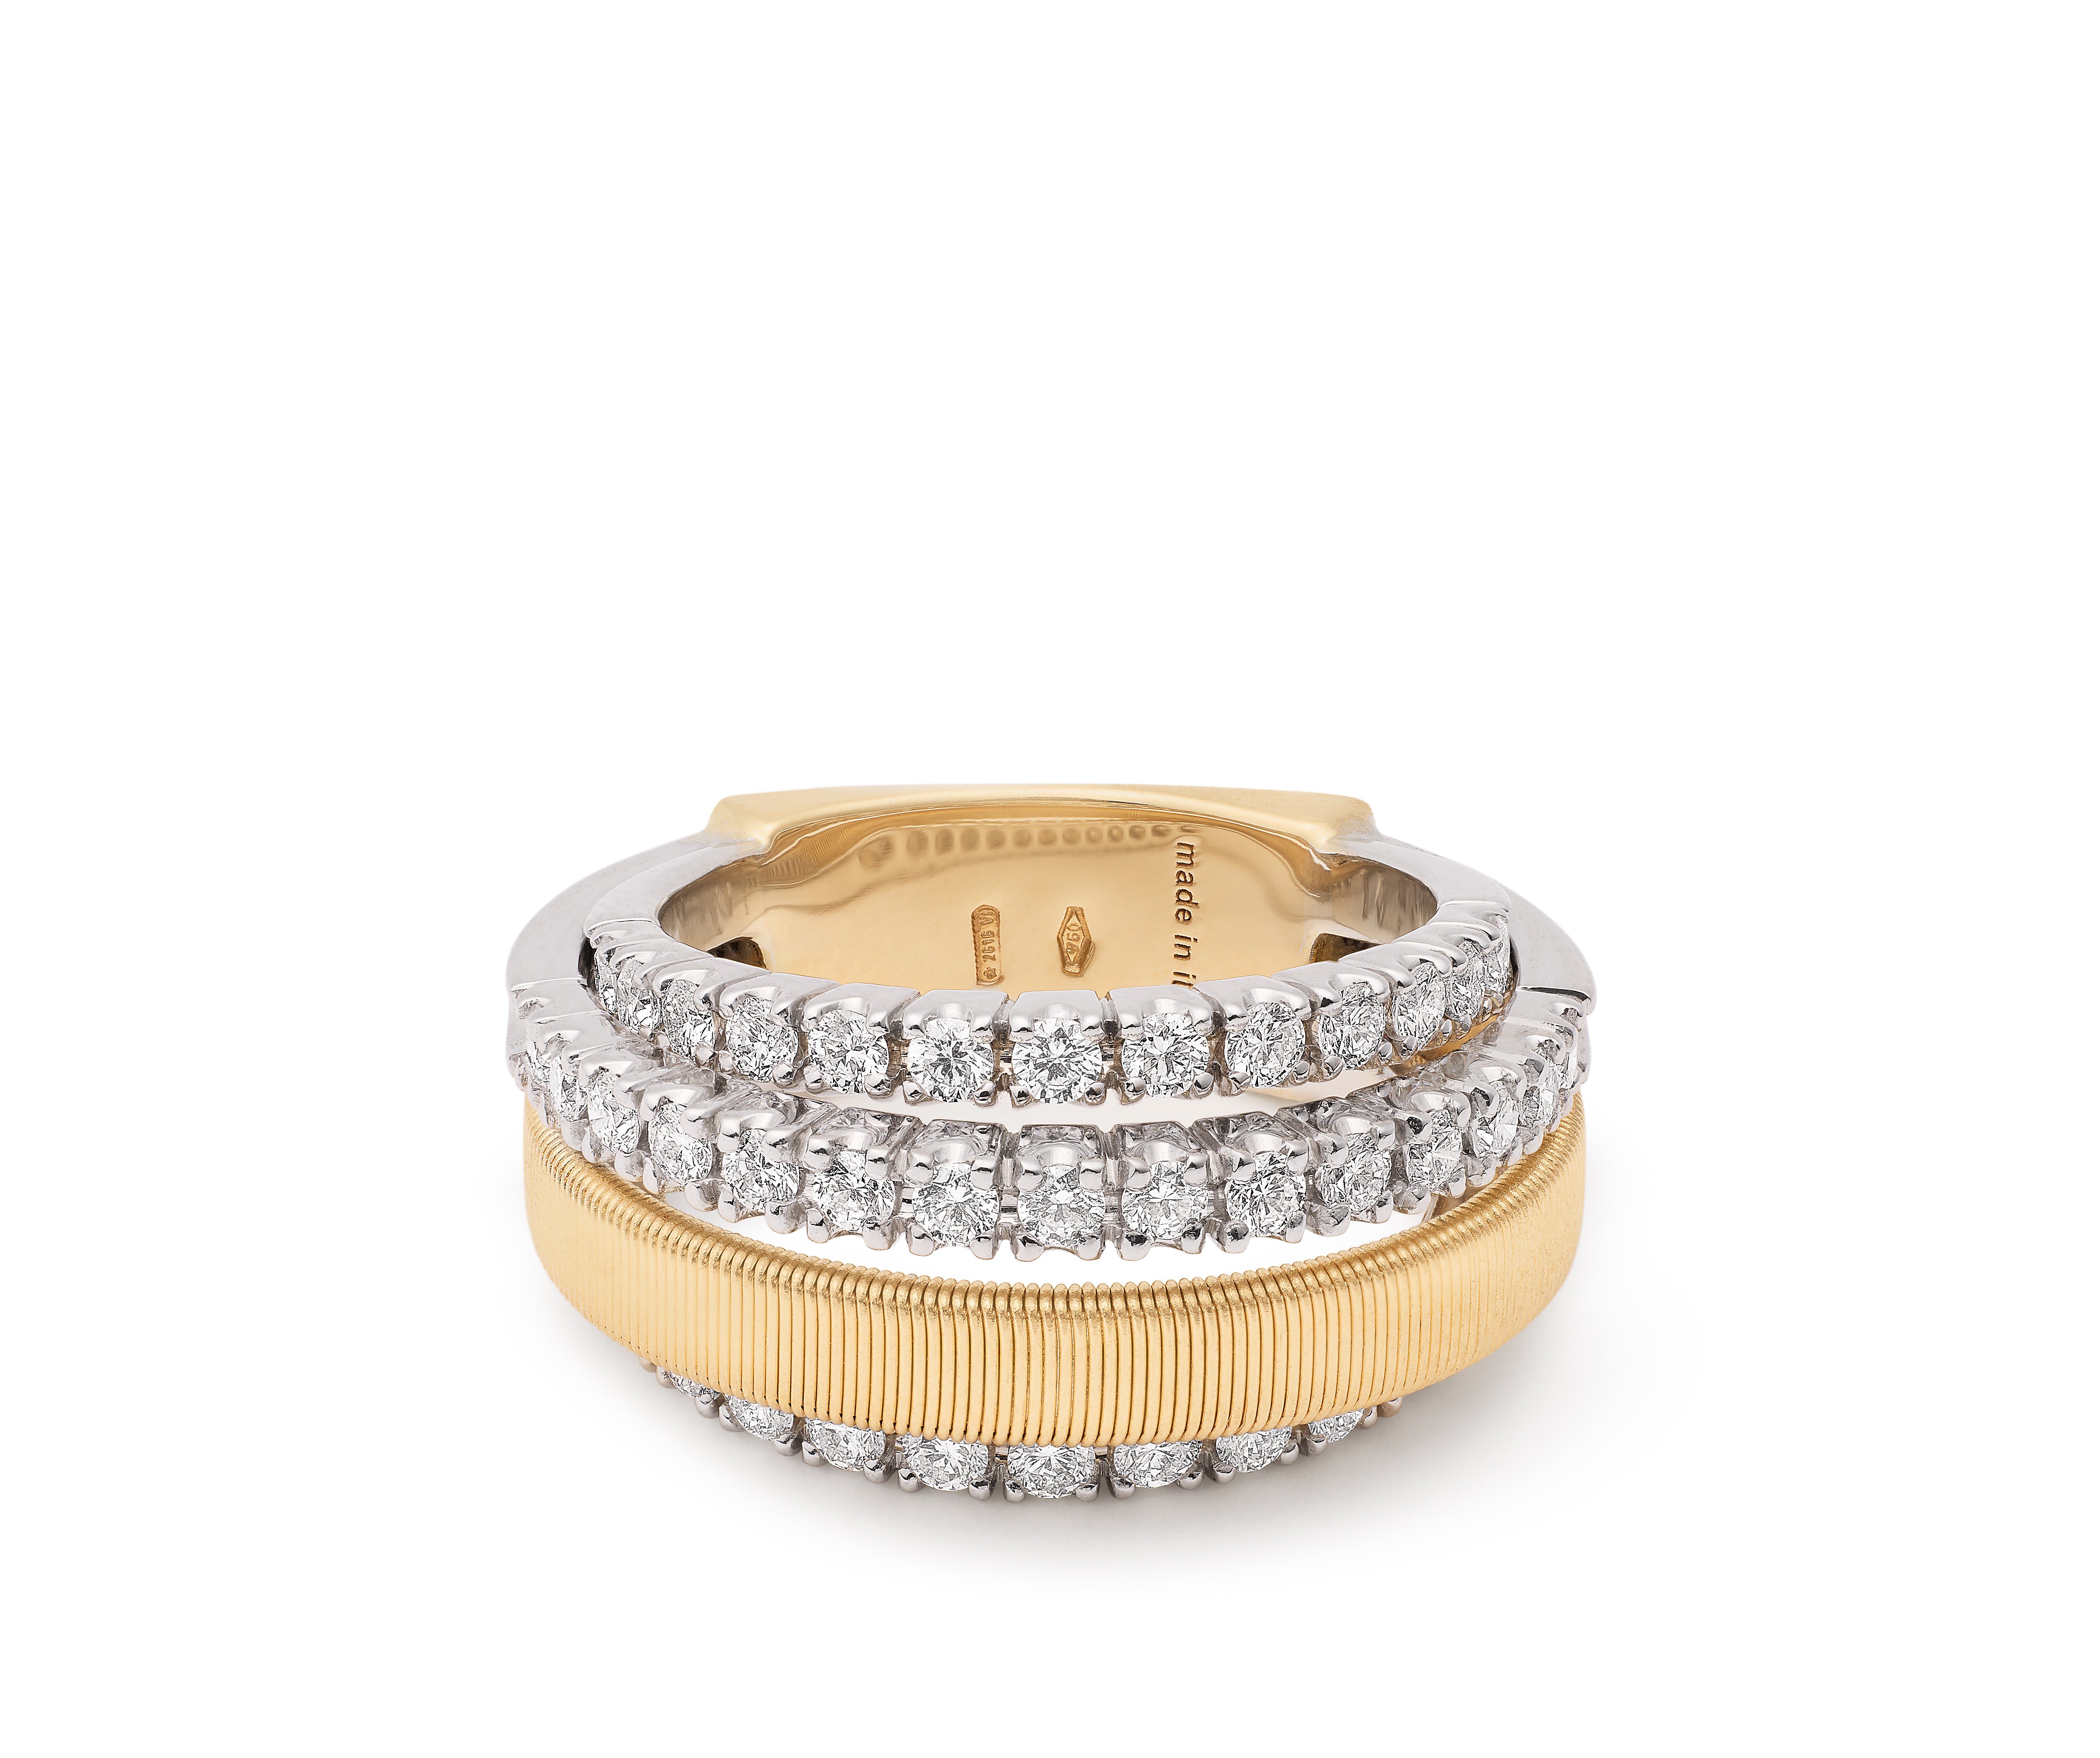 18K YELLOW AND WHITE GOLD DIAMOND RING FROM THE MASAI COLLECTION 1.23CT